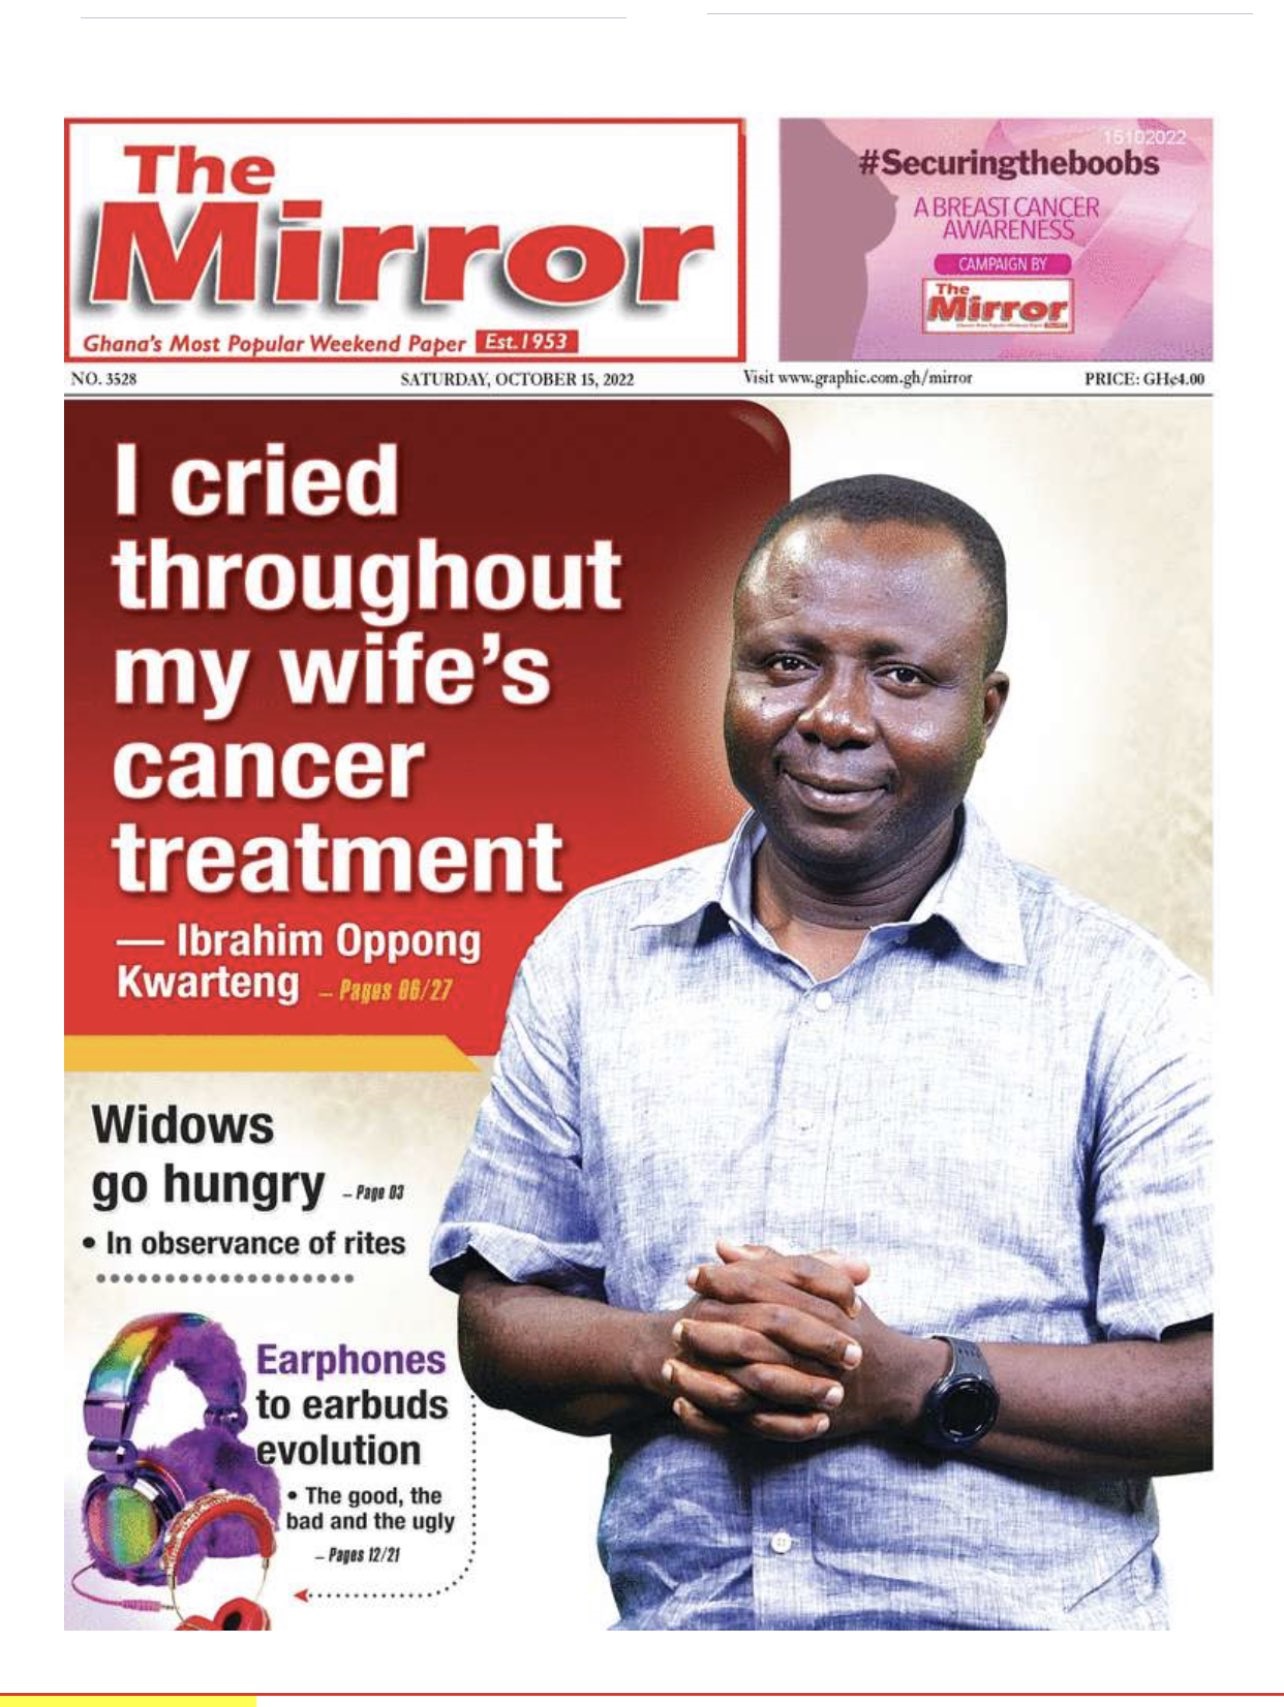 I cried throughout my wife’s cancer treatment - Ibrahim Oppong Kwarteng [VIDEO]